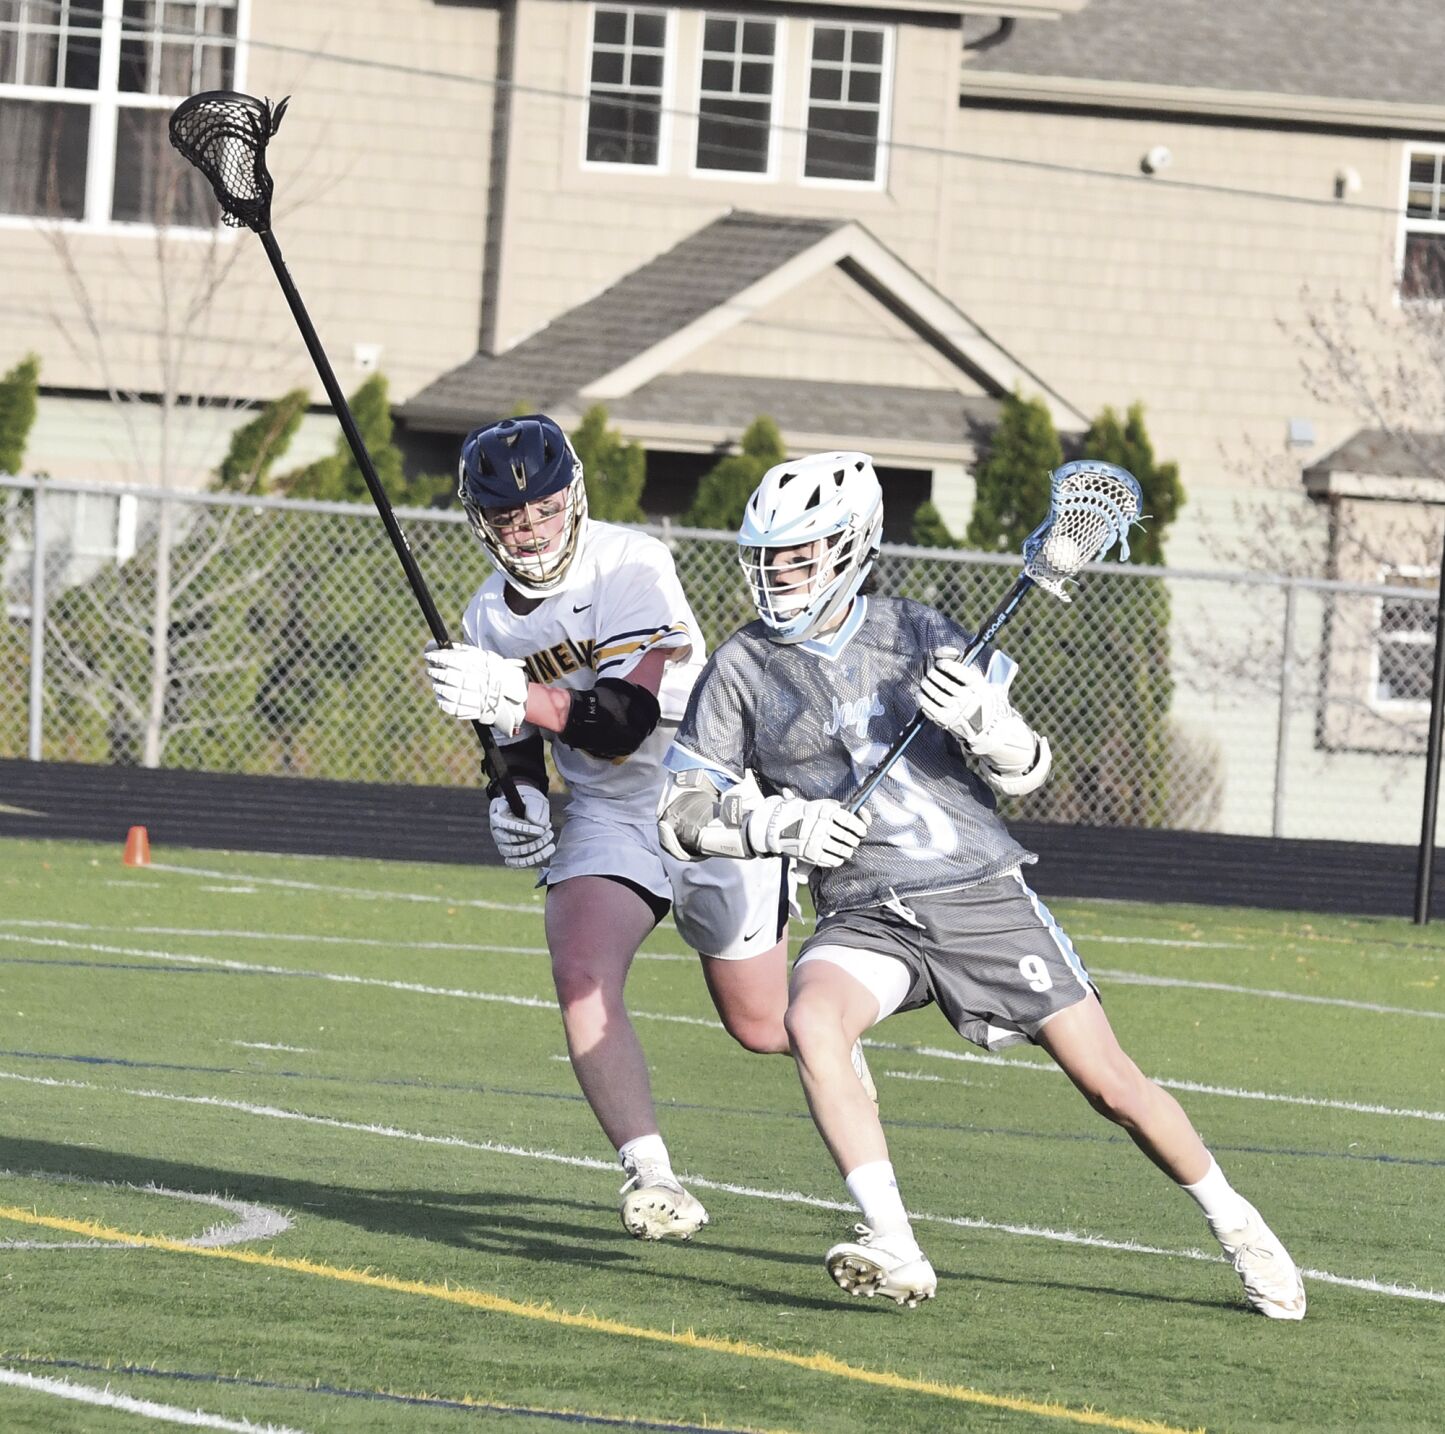 Payoff from growth season is hope for Jags boys lacrosse